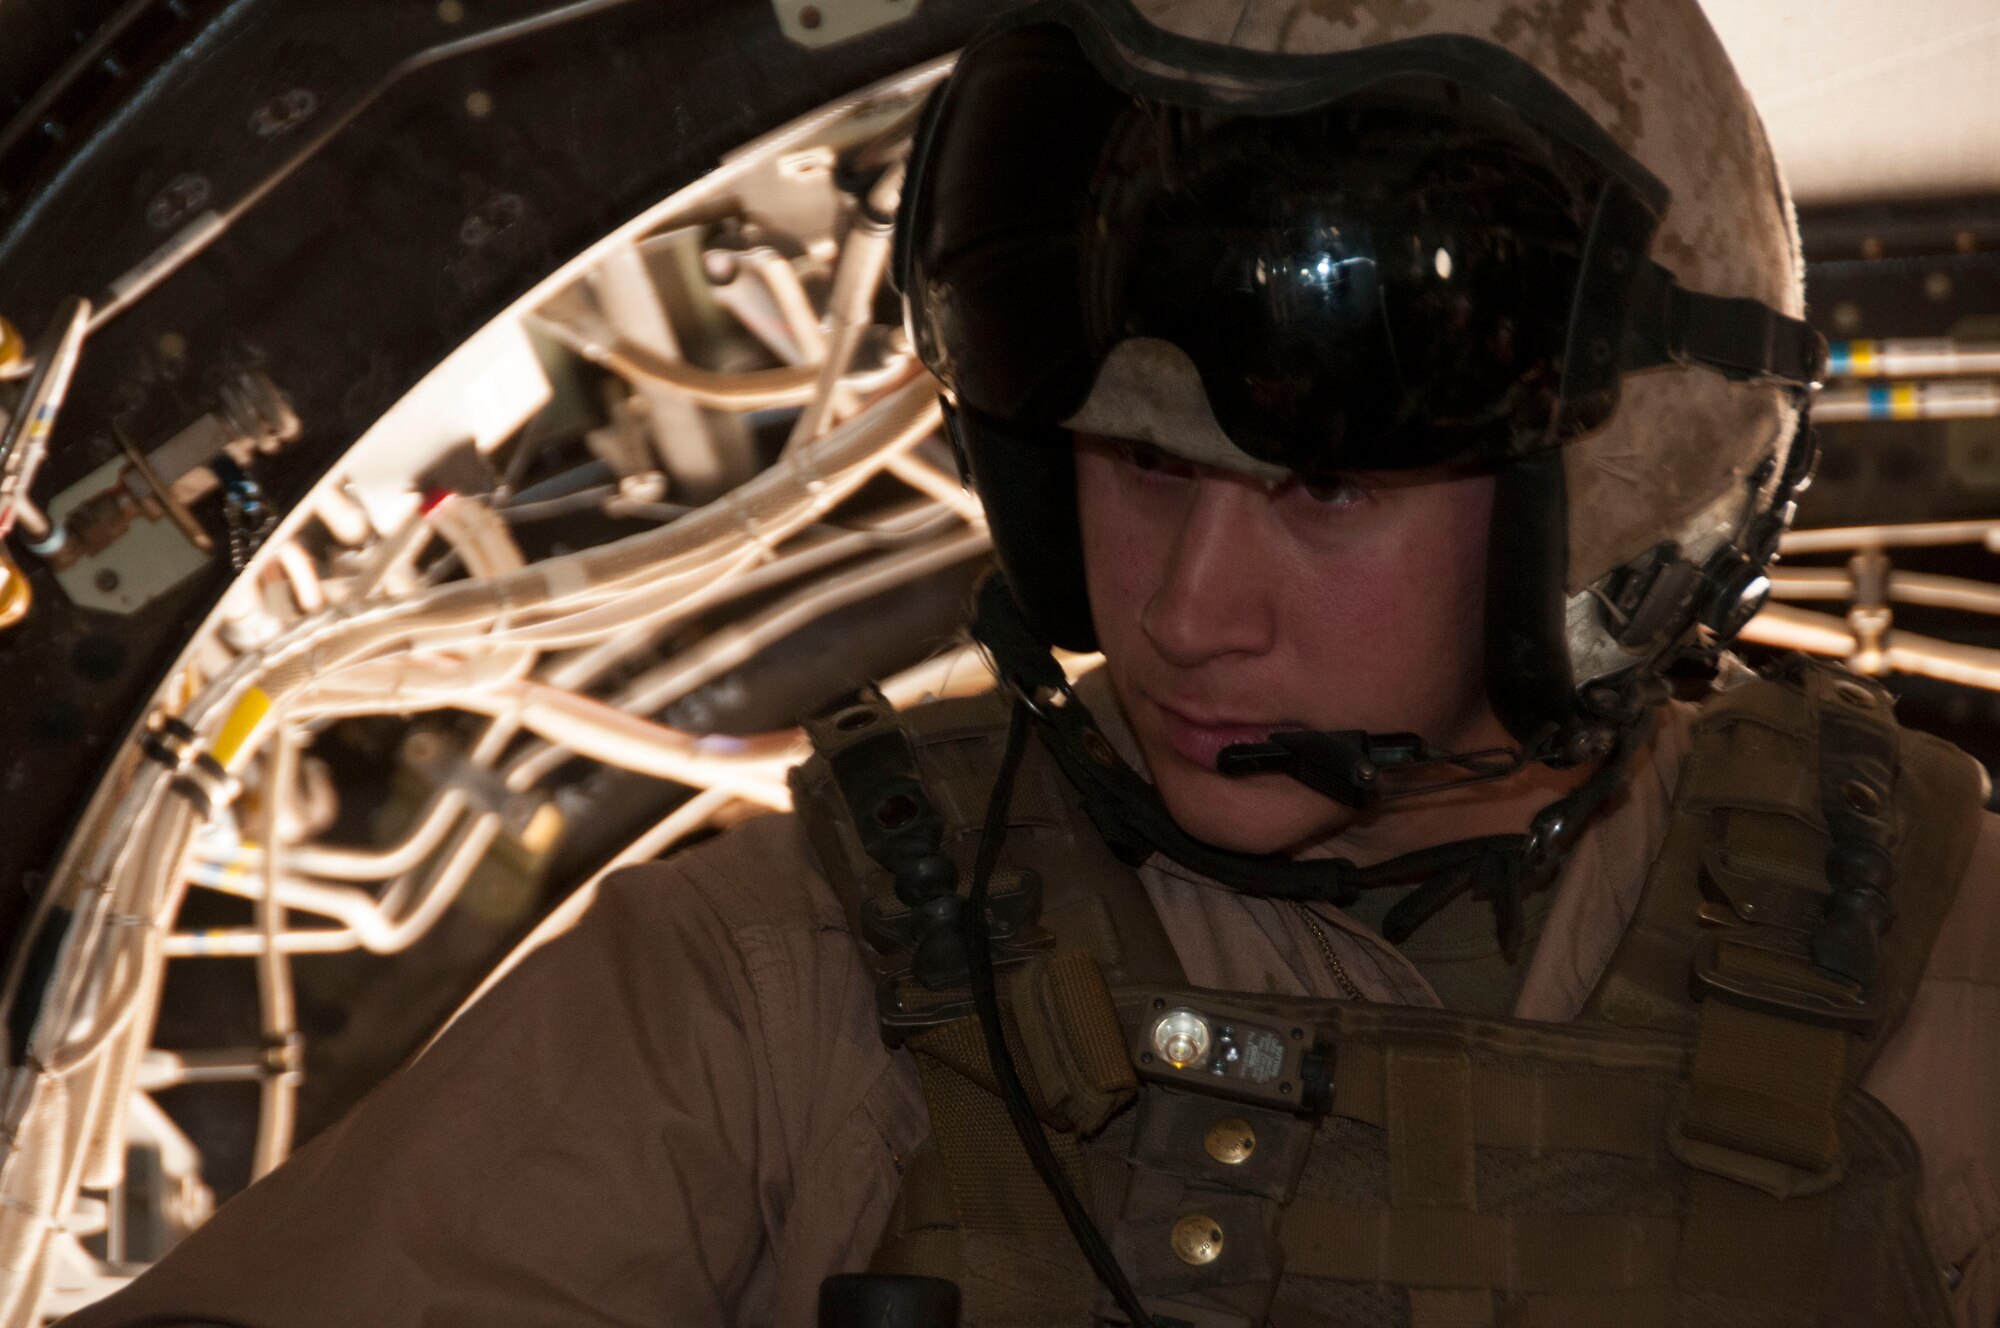 Marine Corps Sgt. Derek Levi conducts pre-flight checks in a MV-22 Osprey, May 20. Levi is a crew chief with the Marine Medium Tiltrotor Squadron - 165, a Miramar, California, unit that brought their MV-22 Ospreys to the 162nd Wing’s Total Force Training Center, located at Davis-Monthan Air Force. (U.S. Air National Guard photo by Tech. Sgt. Erich B. Smith)